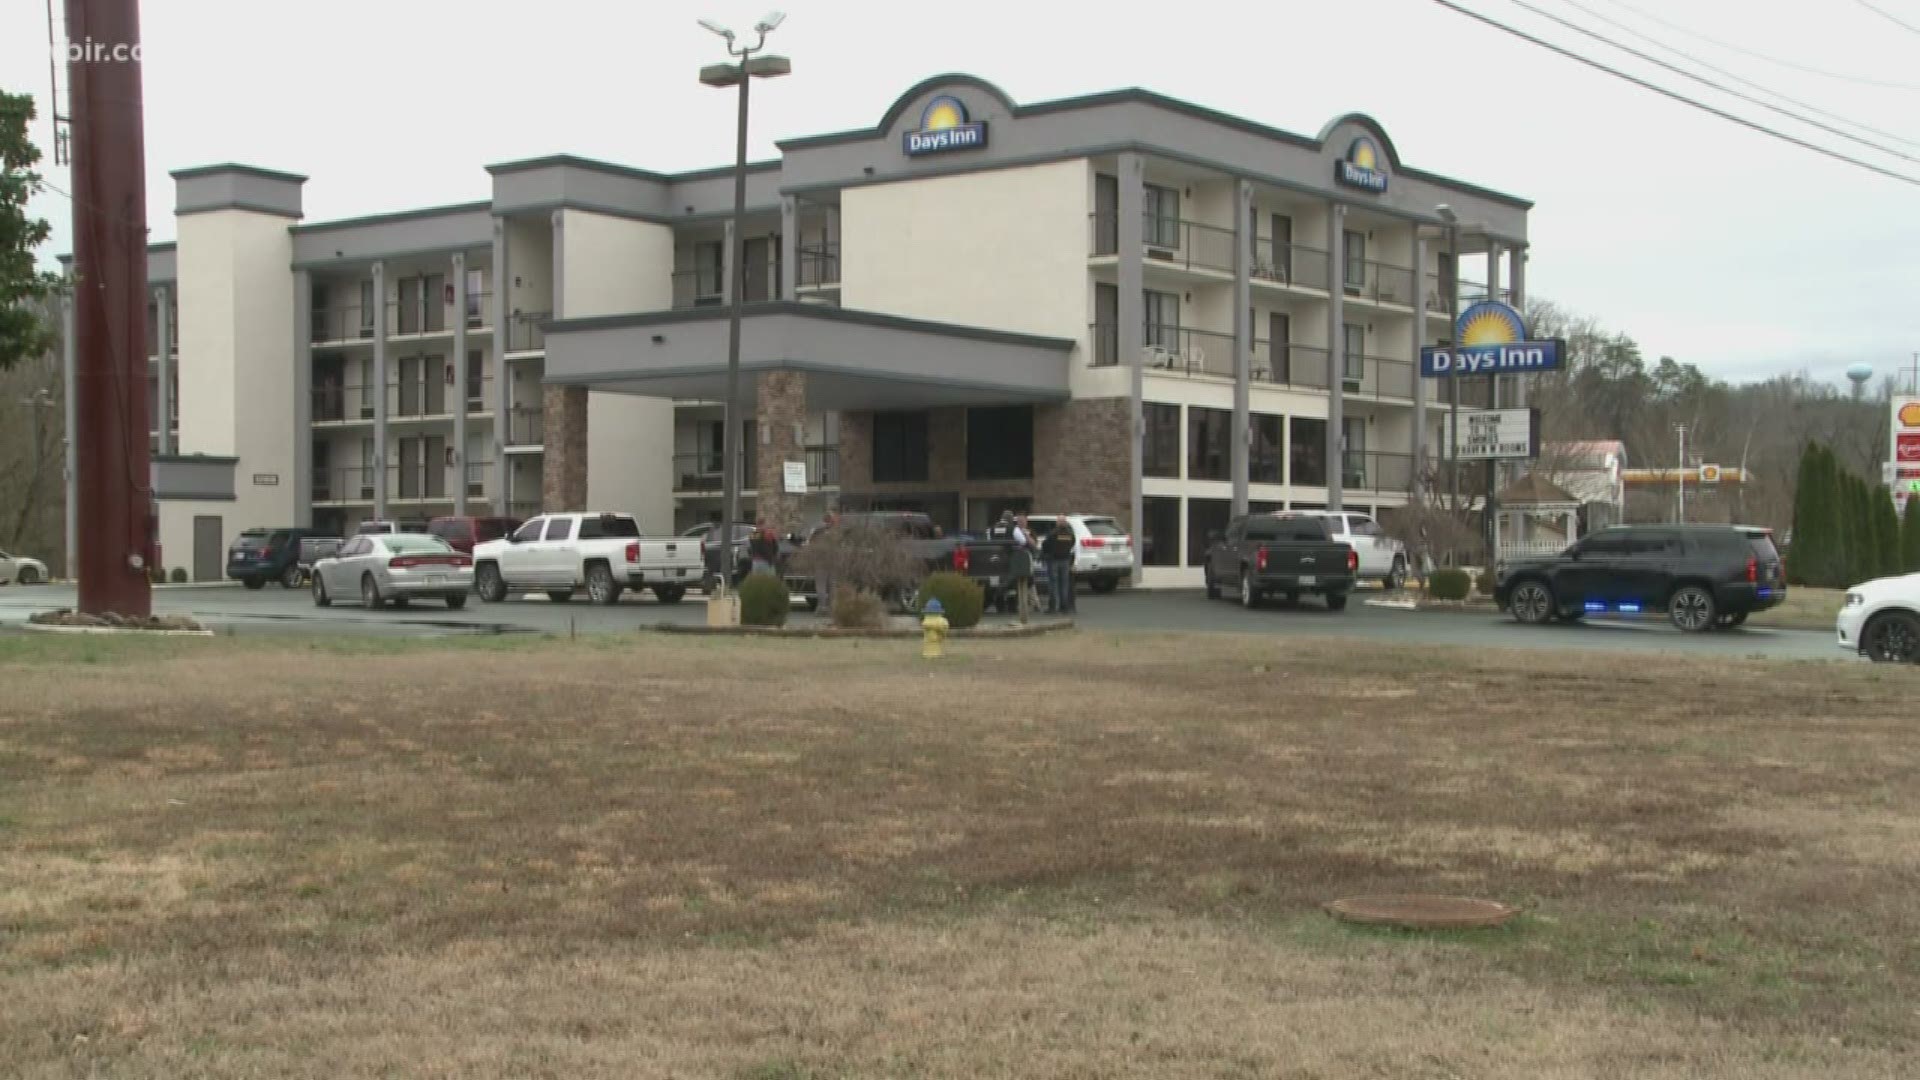 Sevierville police say two suspects are in custody after shots were fired at deputies. It happened at the Days Inn Hotel just off Interstate 40.